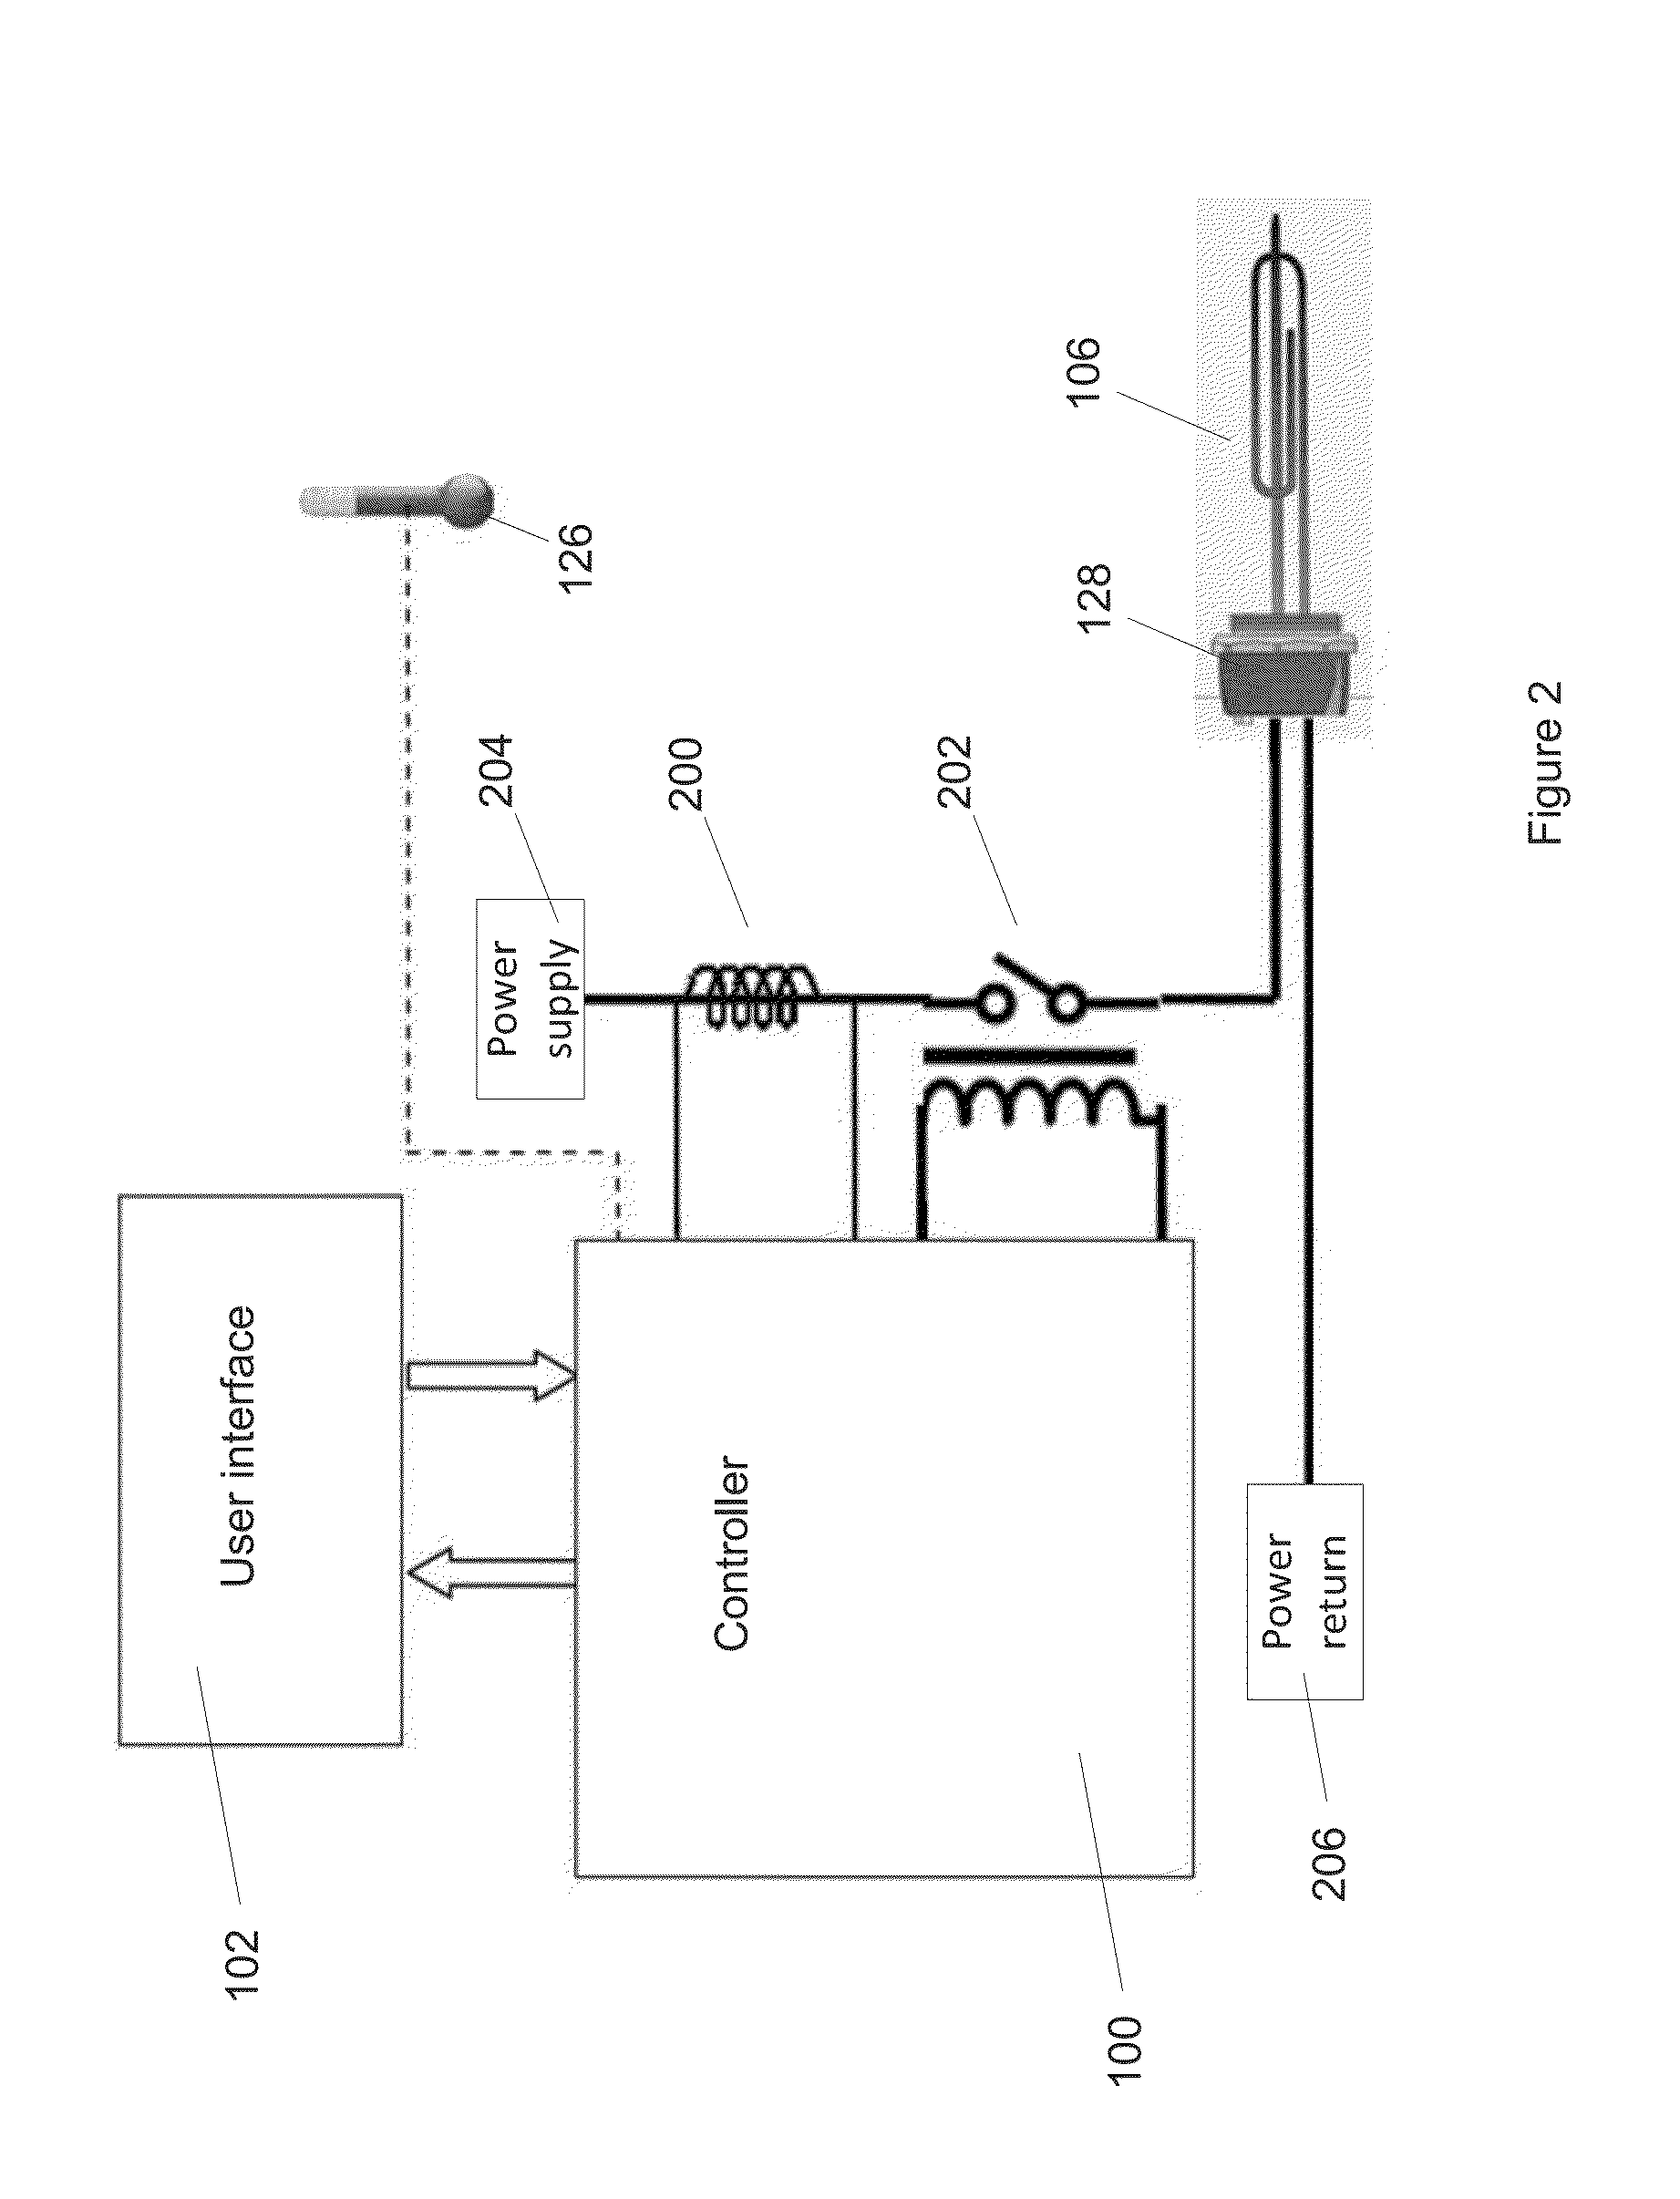 System, method, and apparatus for heating